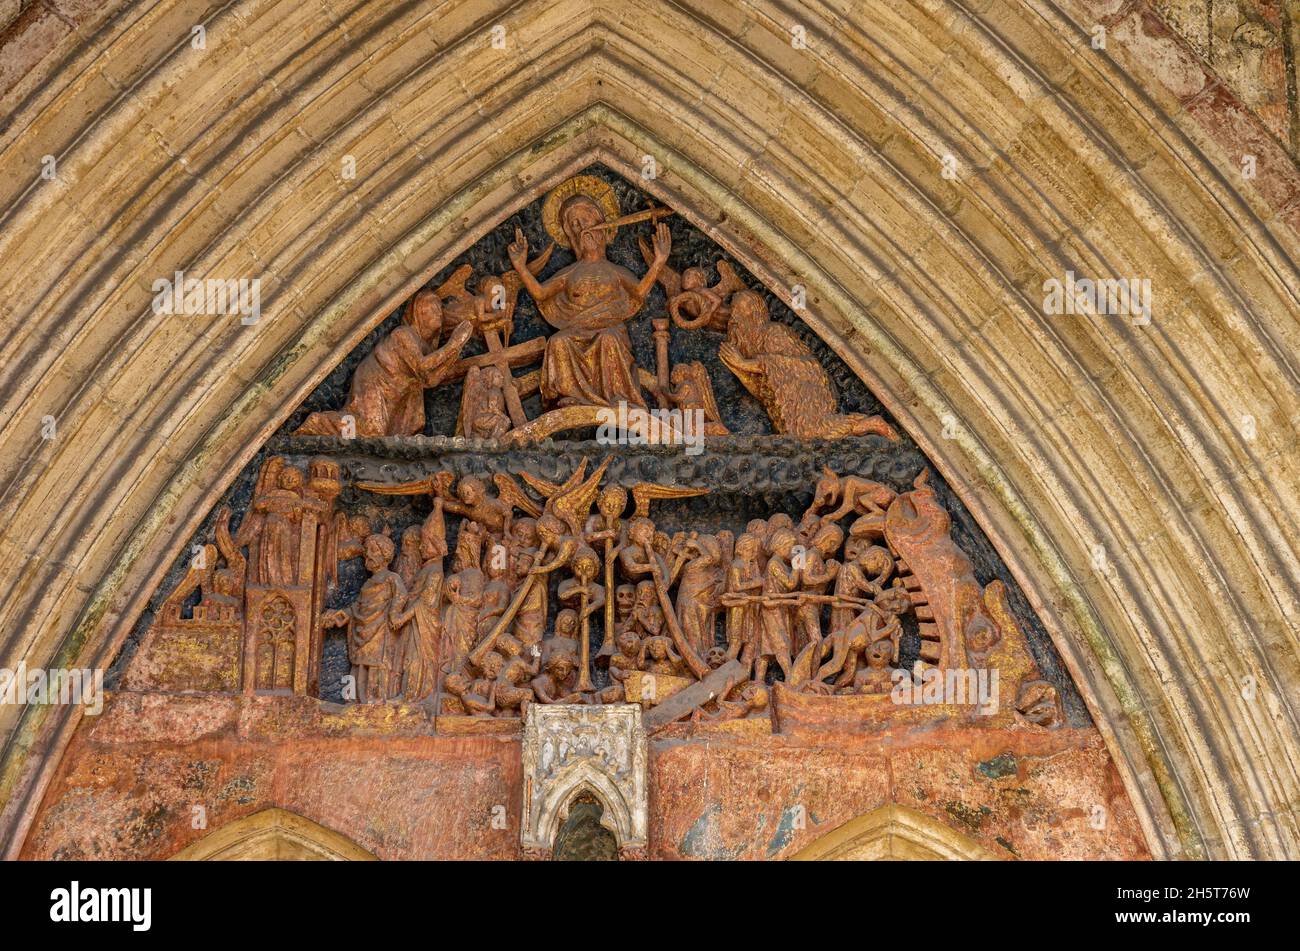 Ulm, Baden-Württemberg, Germany: Tympanum of the Judgment Portal with a late Gothic depiction of the Last Judgement, a side portal of the Minster. Stock Photo